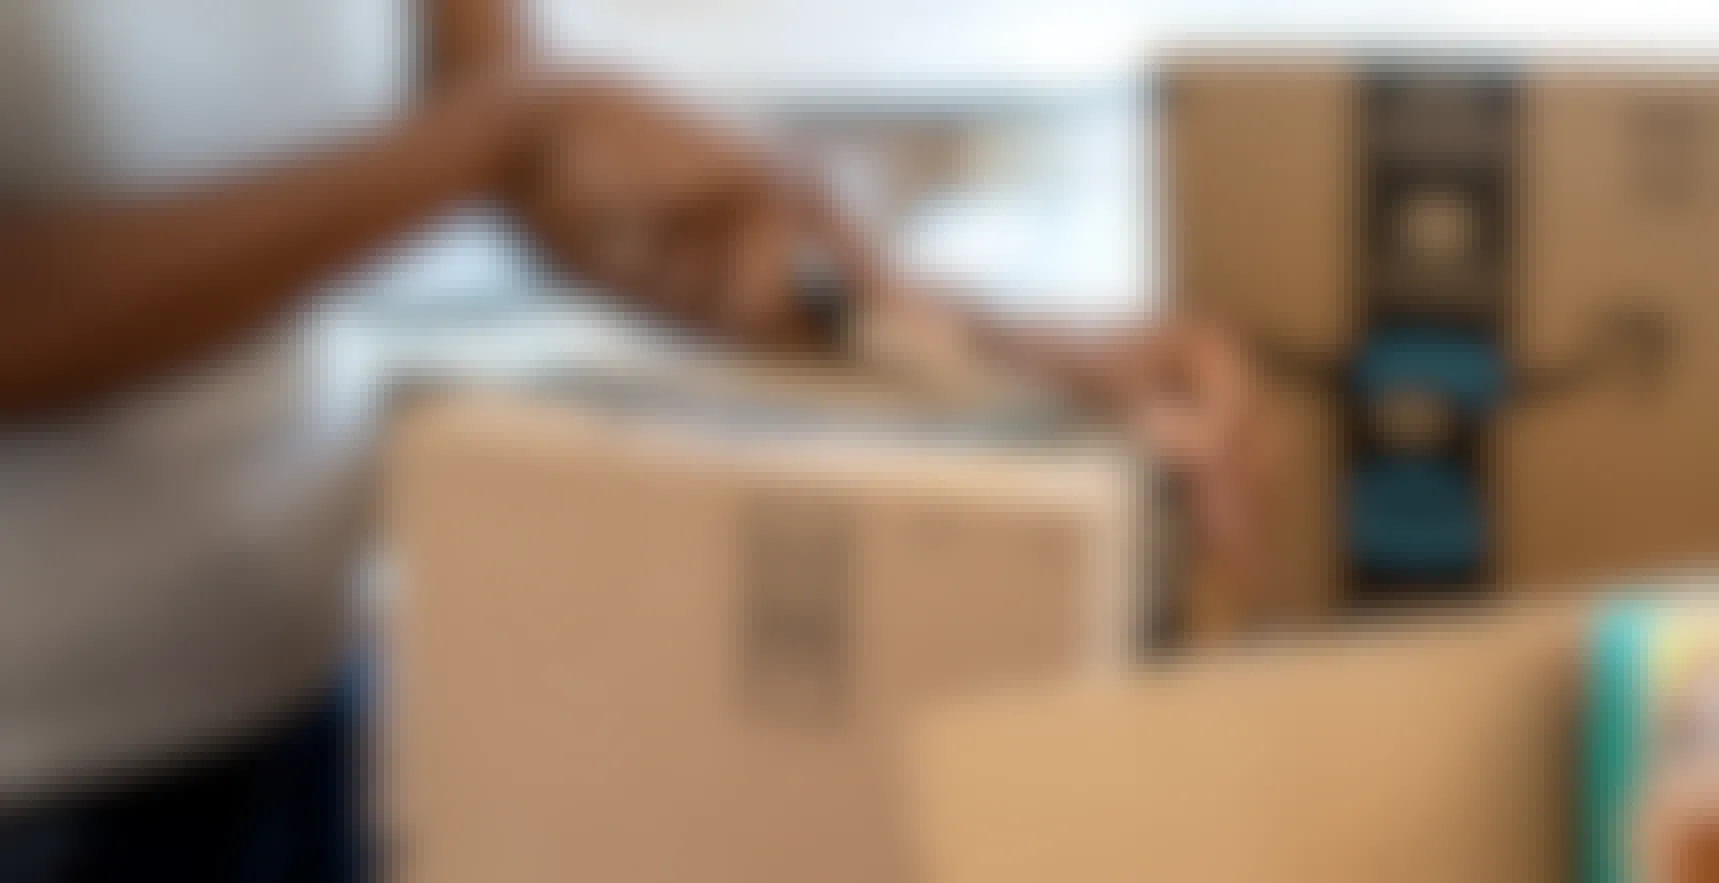 Unclaimed Amazon Packages: Mystery Boxes for Adults?